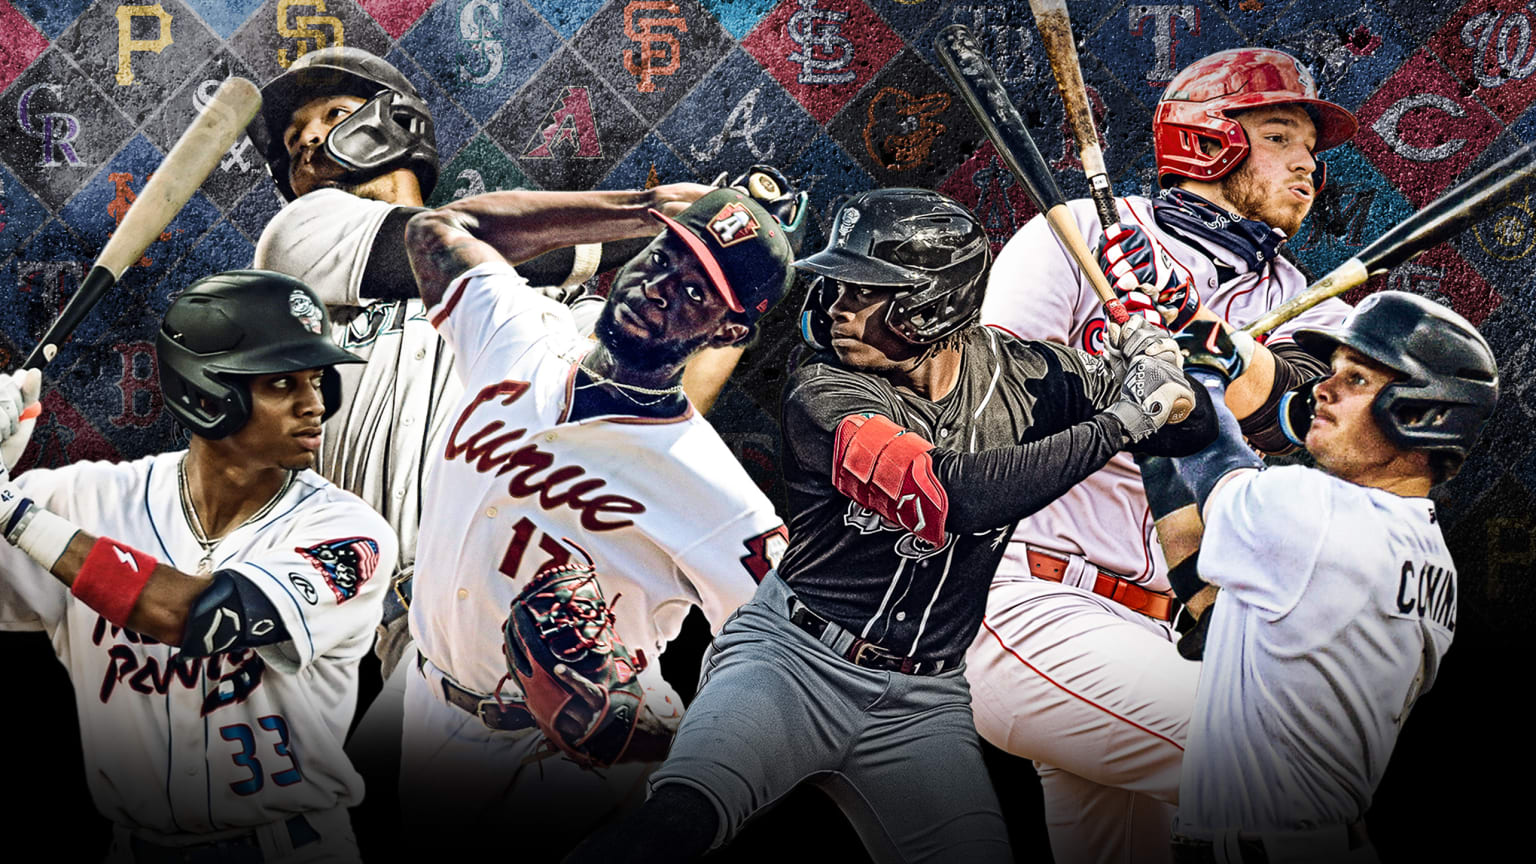 A designed image with a collection of 6 Minor League prospects